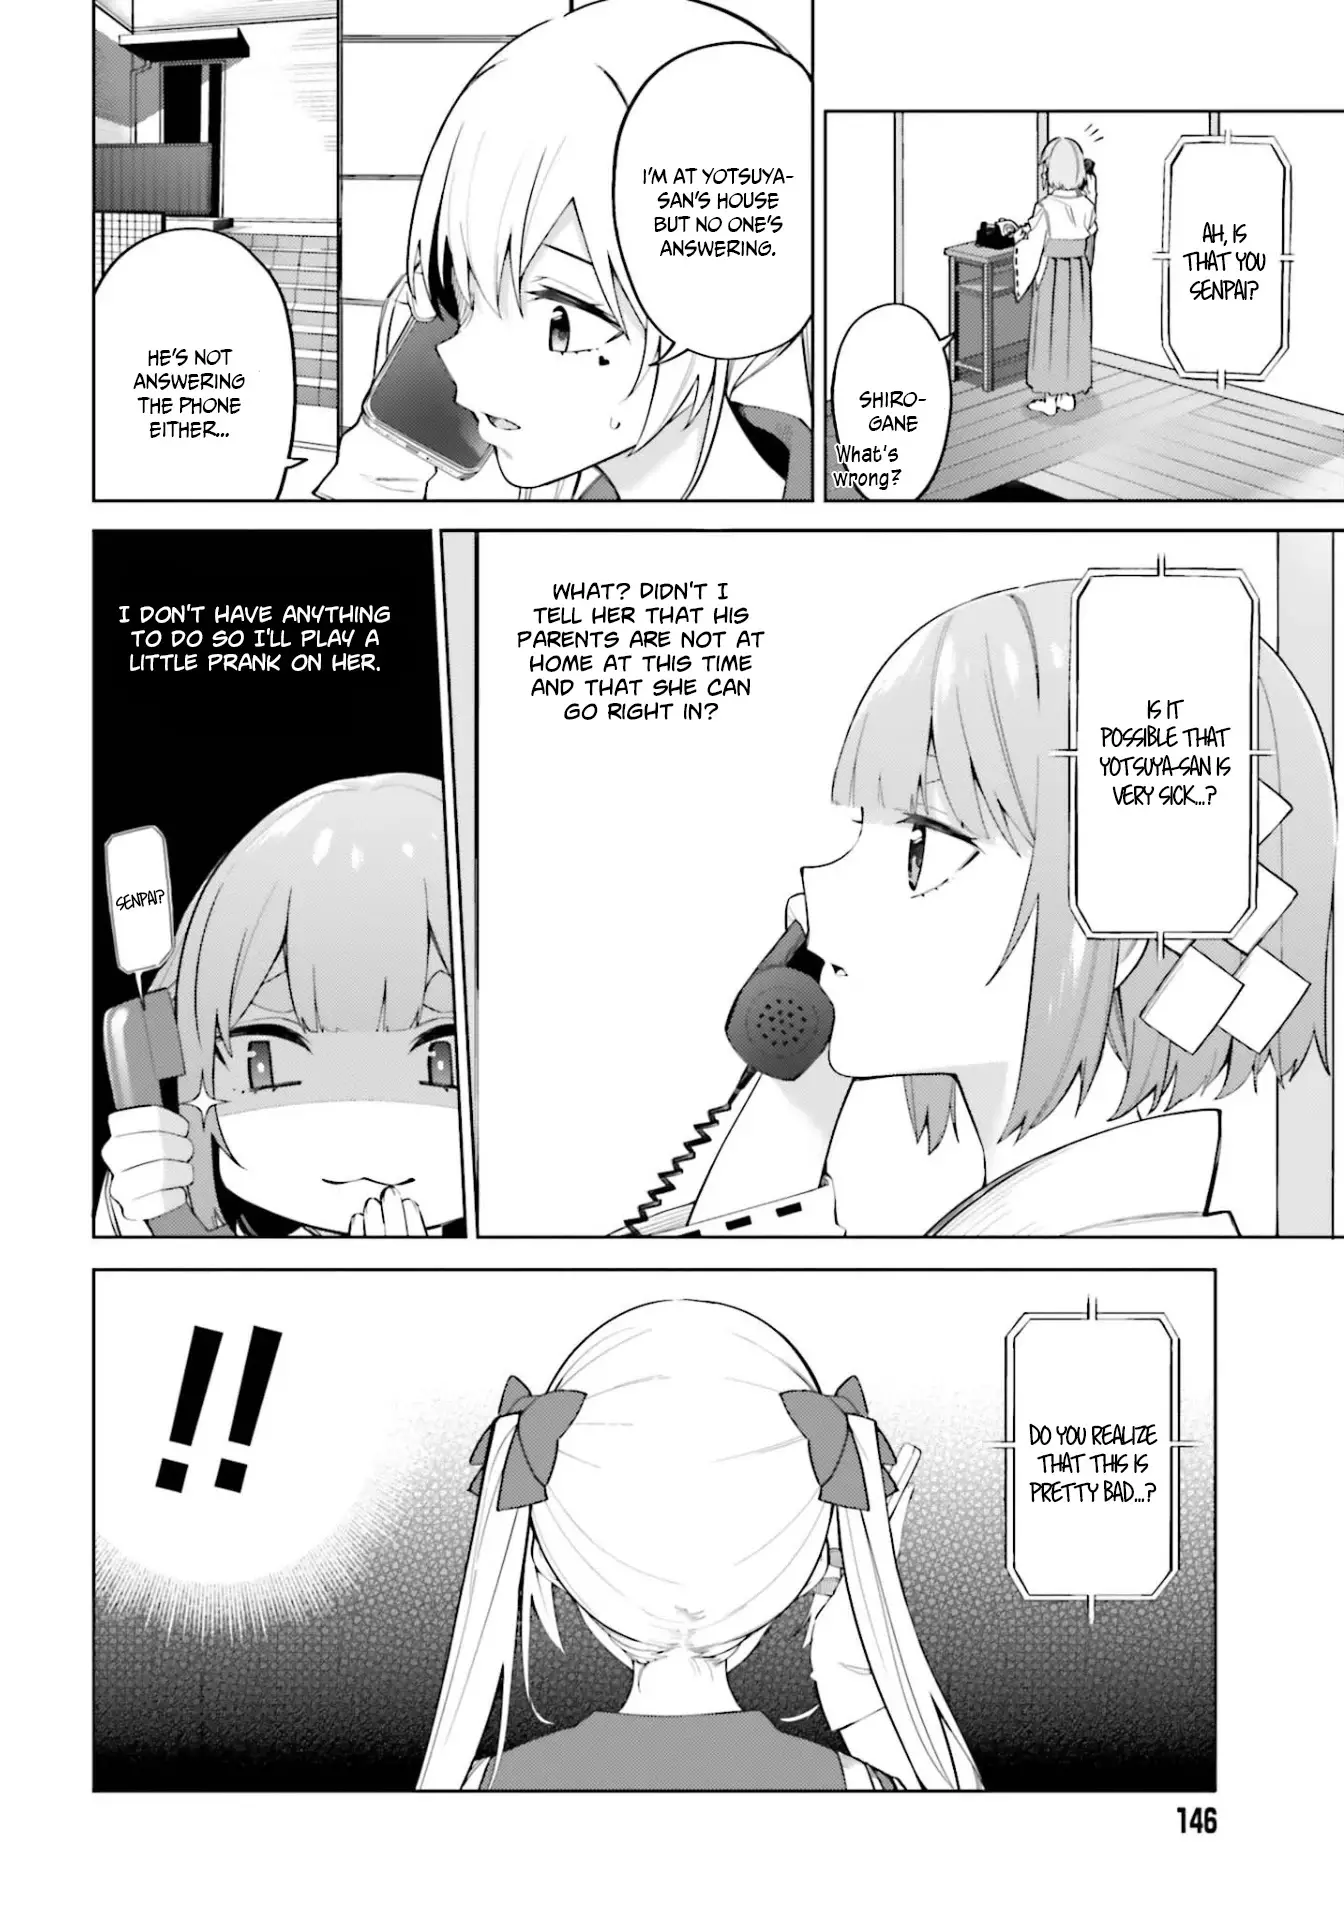 I Don't Understand Shirogane-San's Facial Expression At All - 8 page 13-e4046d07